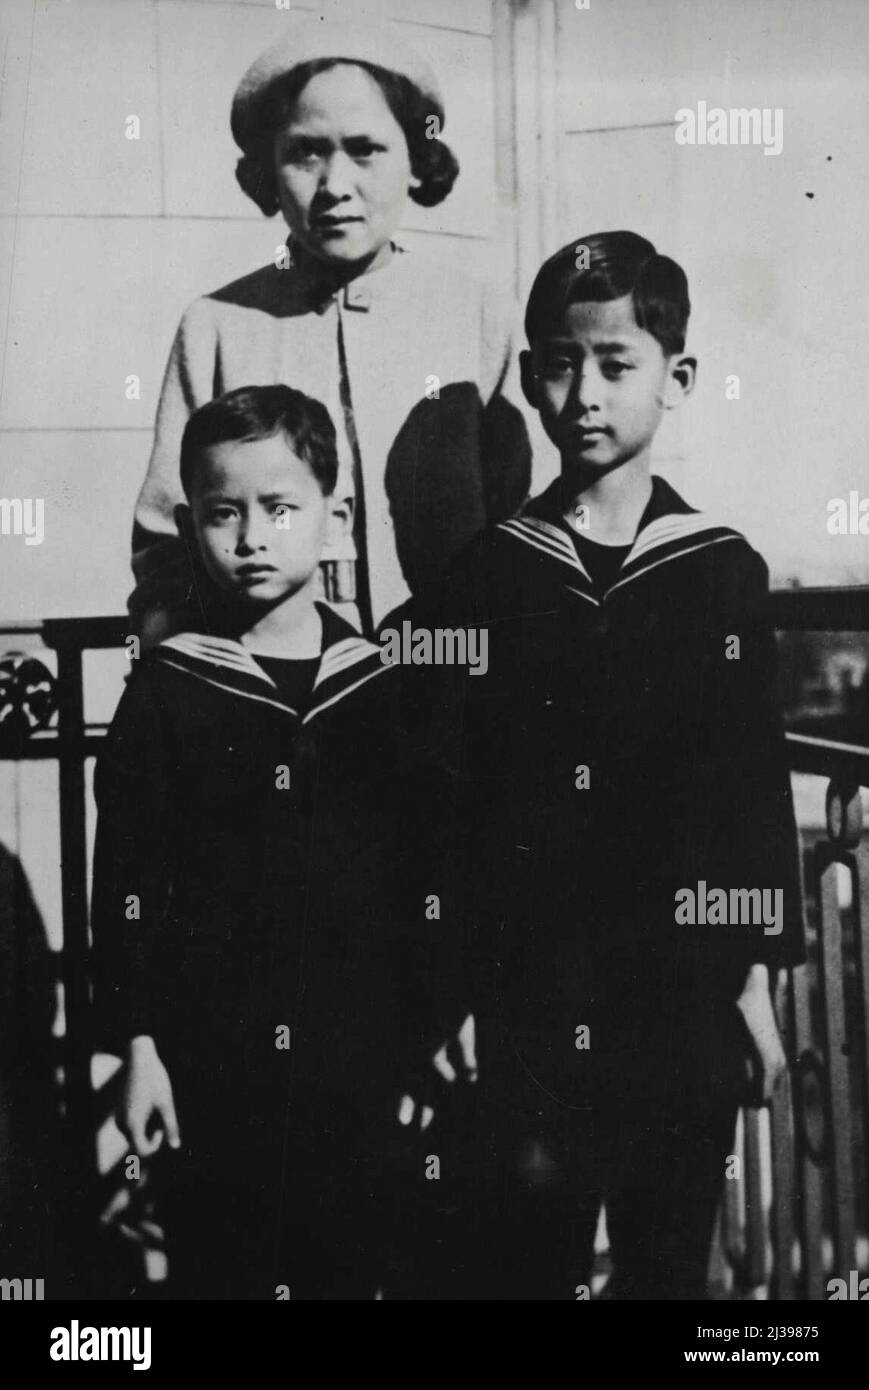 Boy King of Siam Receives First official Delegation His Majesty Anada, King of Siam, who is to remain at school at Lausanne for the next two years, received his first official delegation, from Swiss Government, at the Lausanne ***** Hotel recently. King Ananda (right) with his you ***** brother and his mother, Princess Mahidol, after the ceremony. May 13, 1935. (Photo by Associated Press Photo). Stock Photo